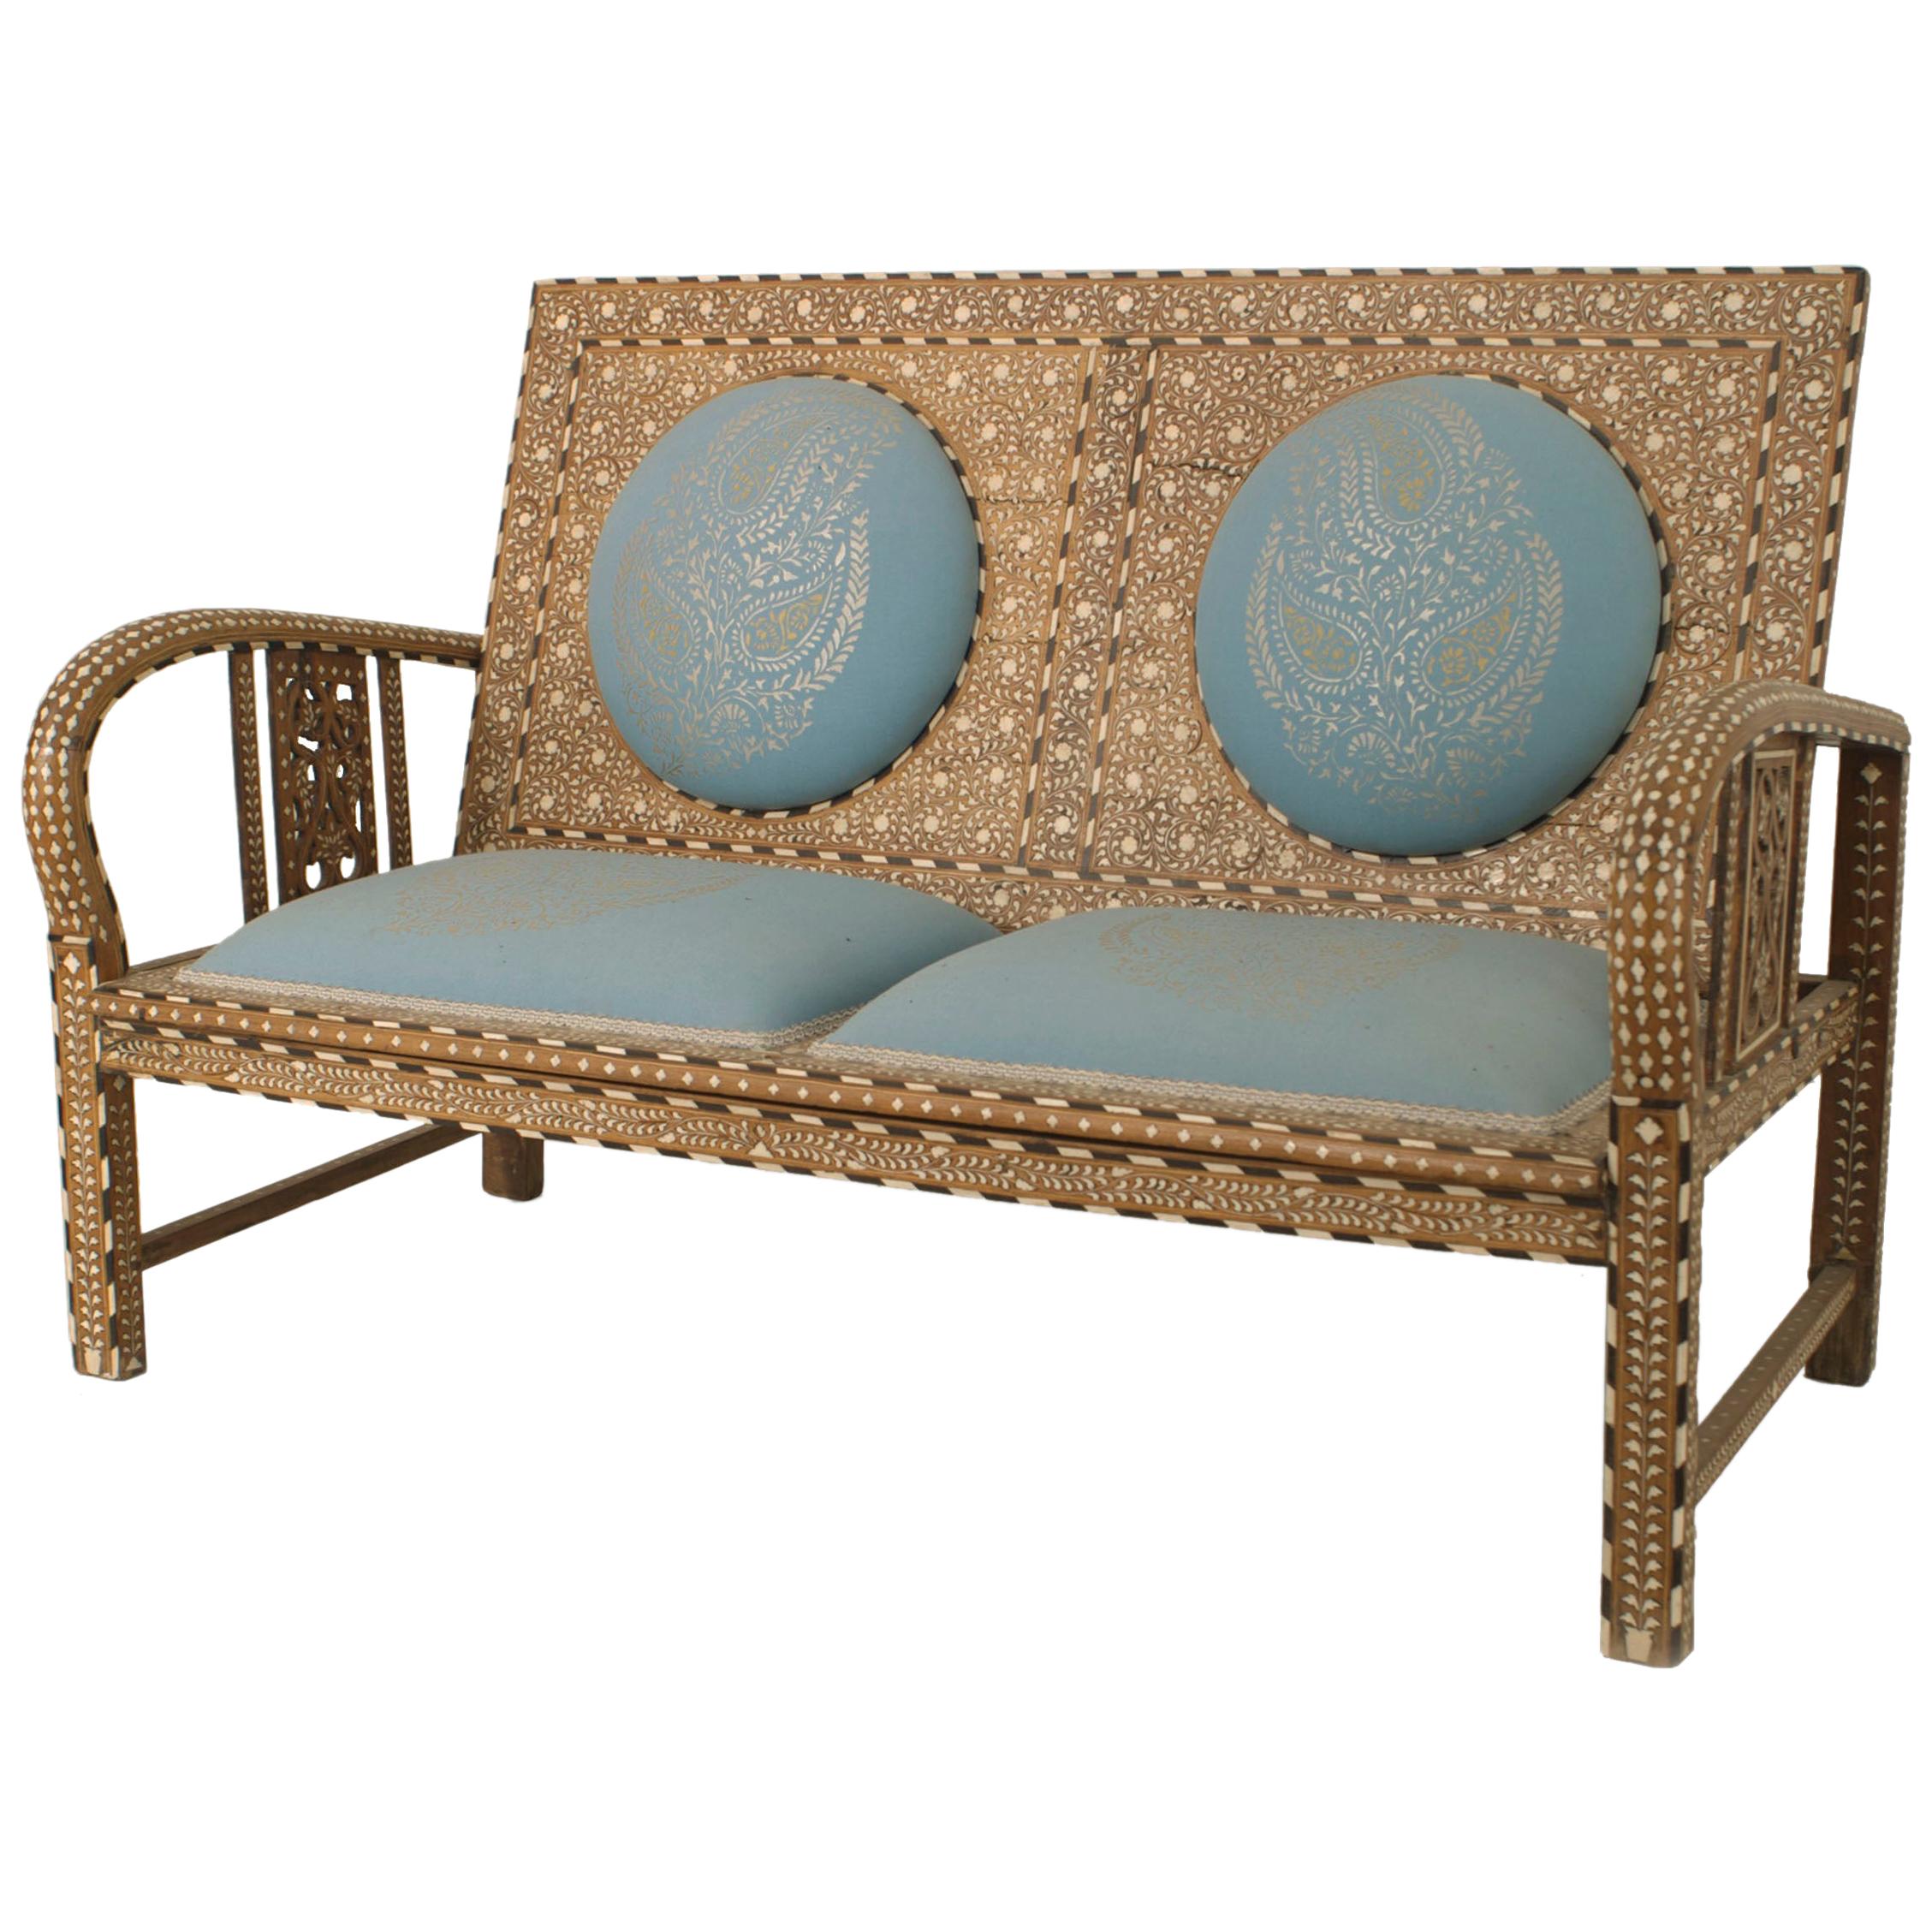 Anglo-Indian Teak Inlaid Upholstered Loveseat